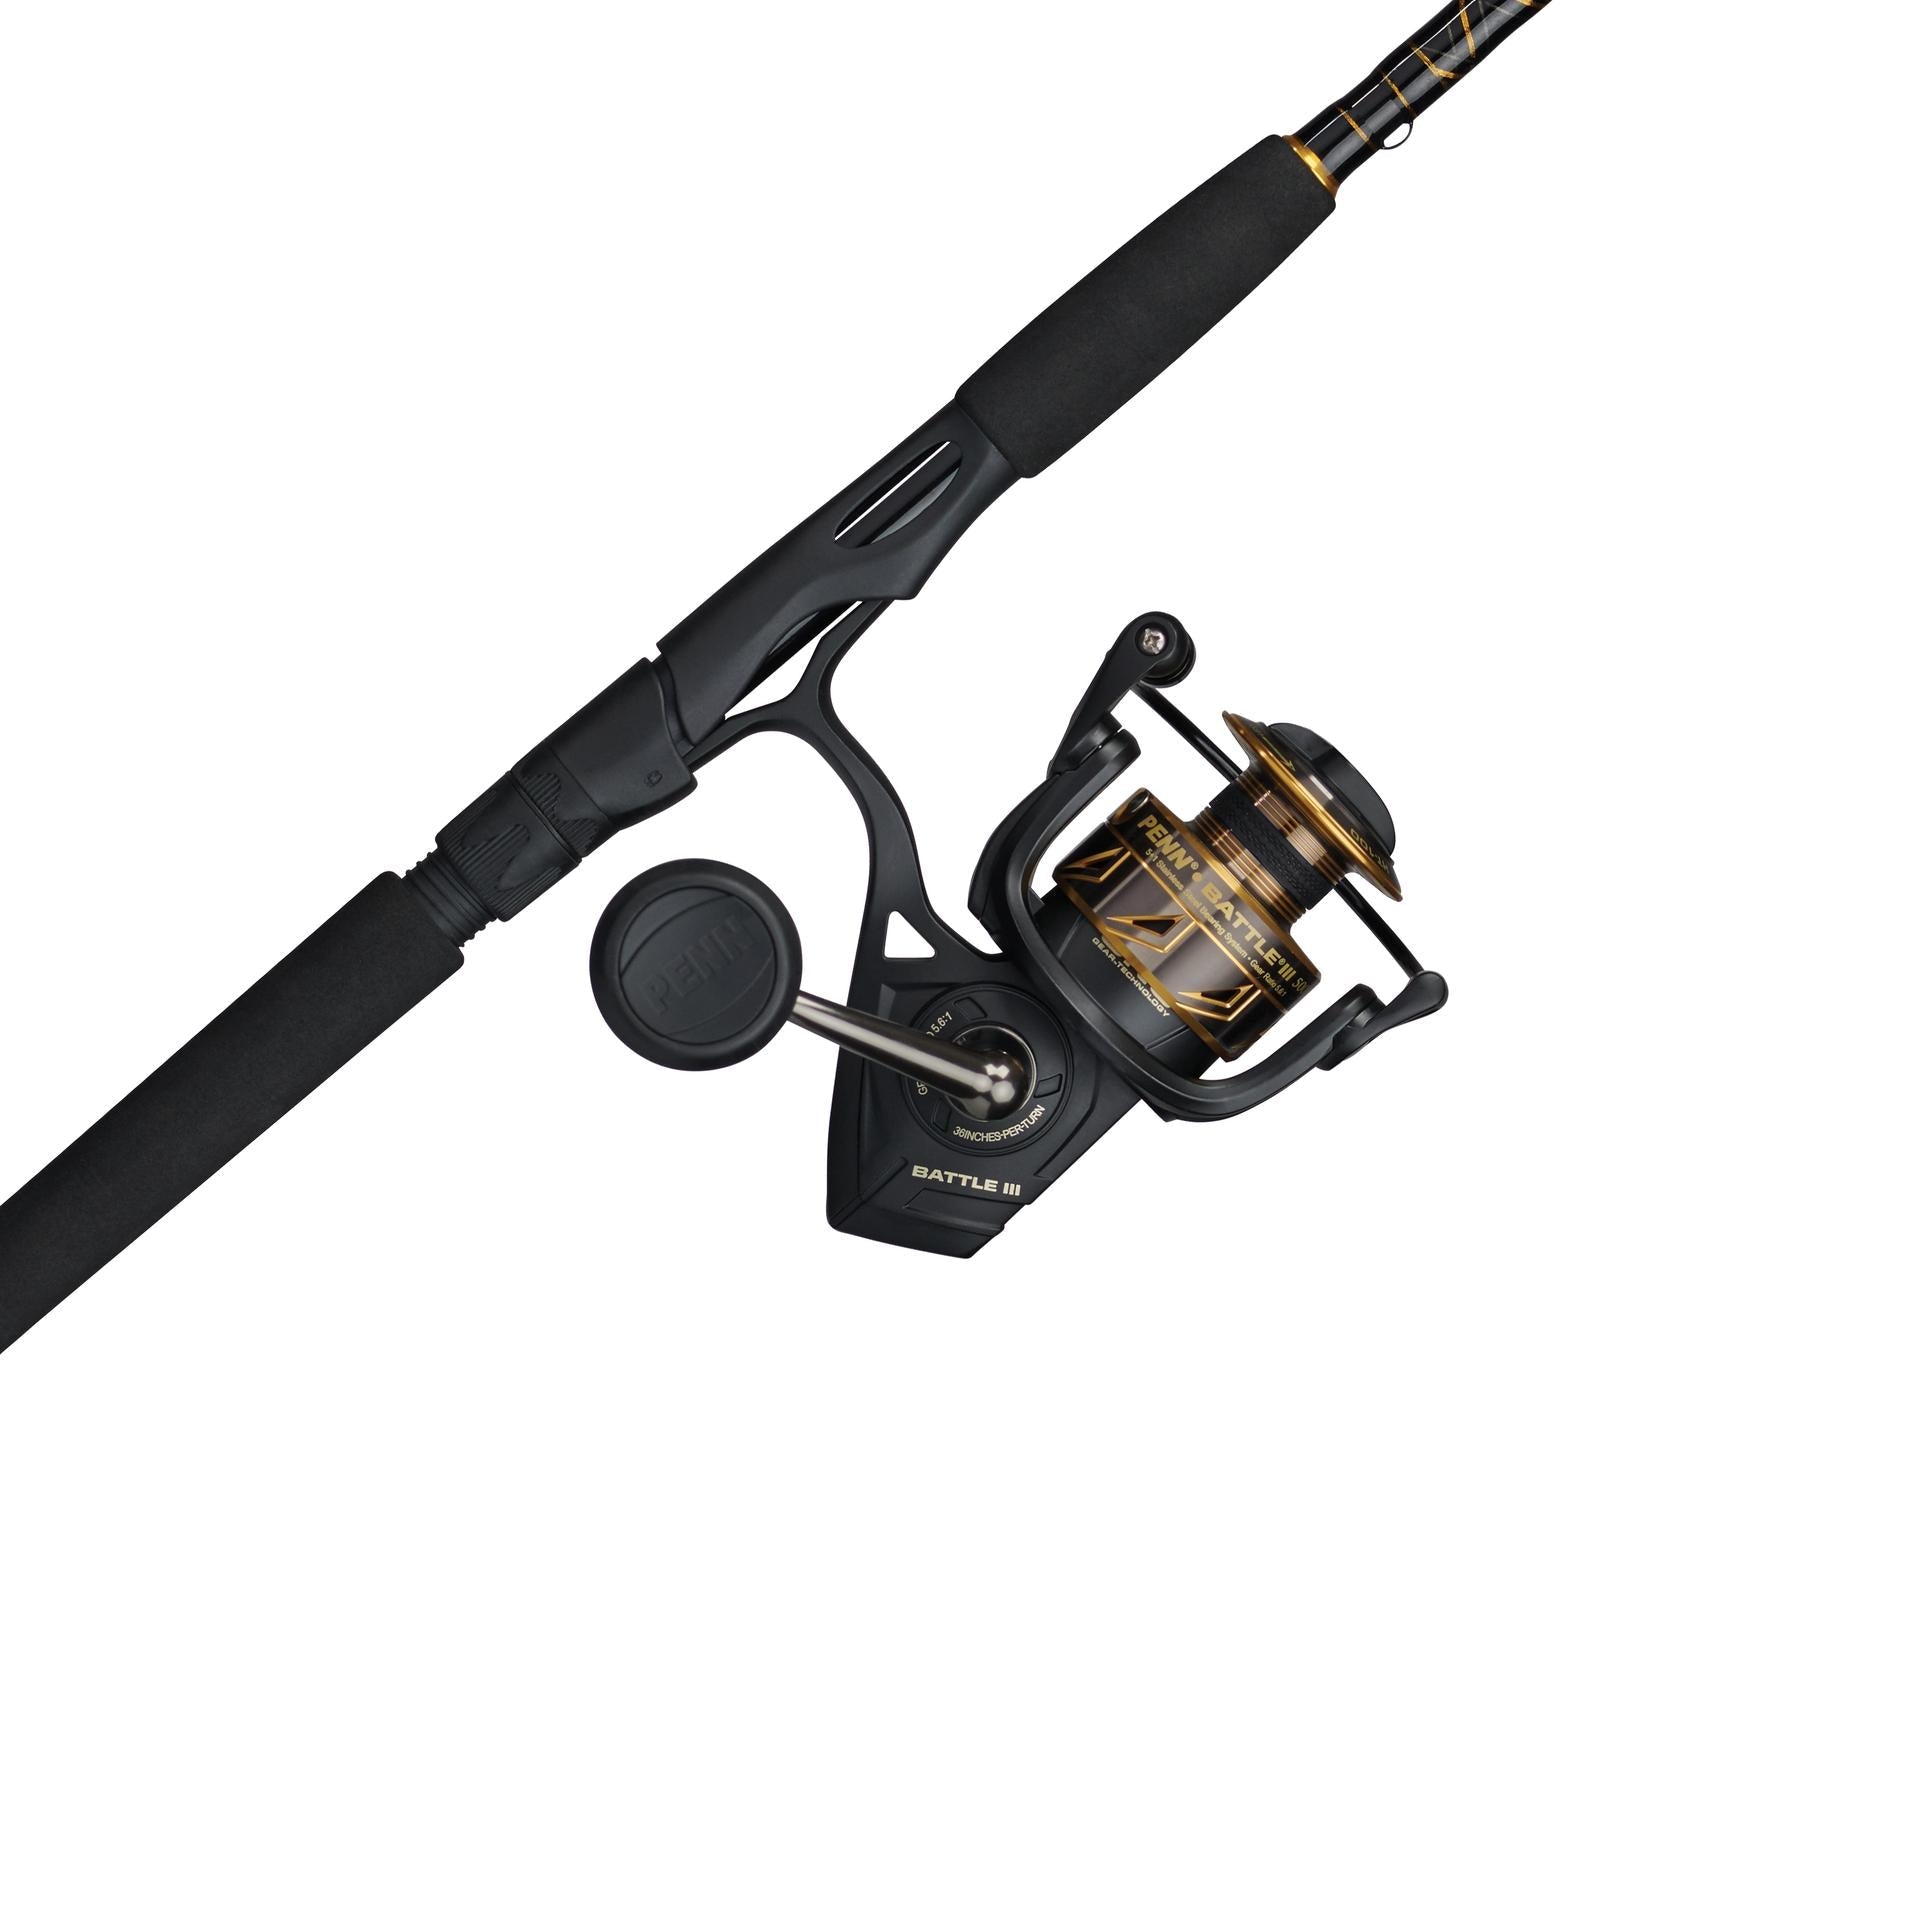 Fishing poles for sale 500 takes all - Classifieds - Buy, Sell